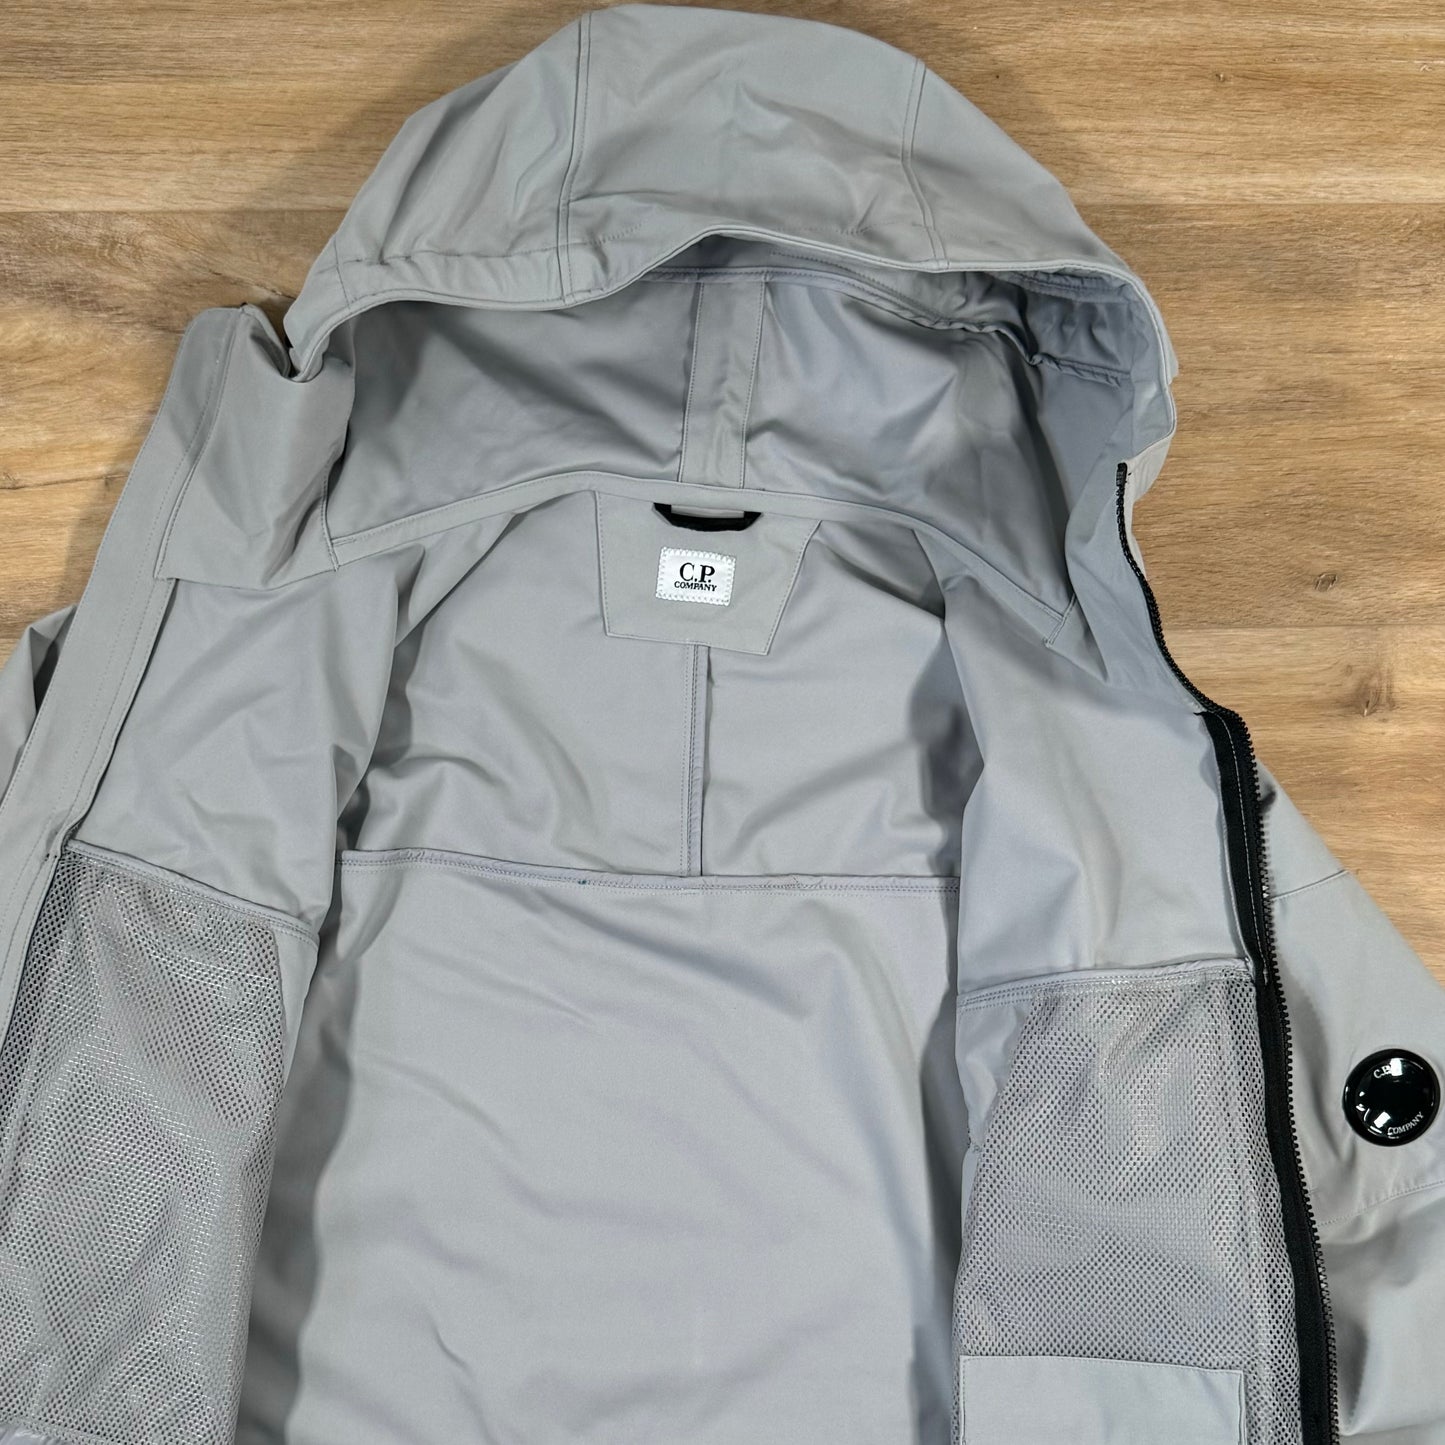 C.P. Company Soft Shell Lens Jacket in Drizzle Grey